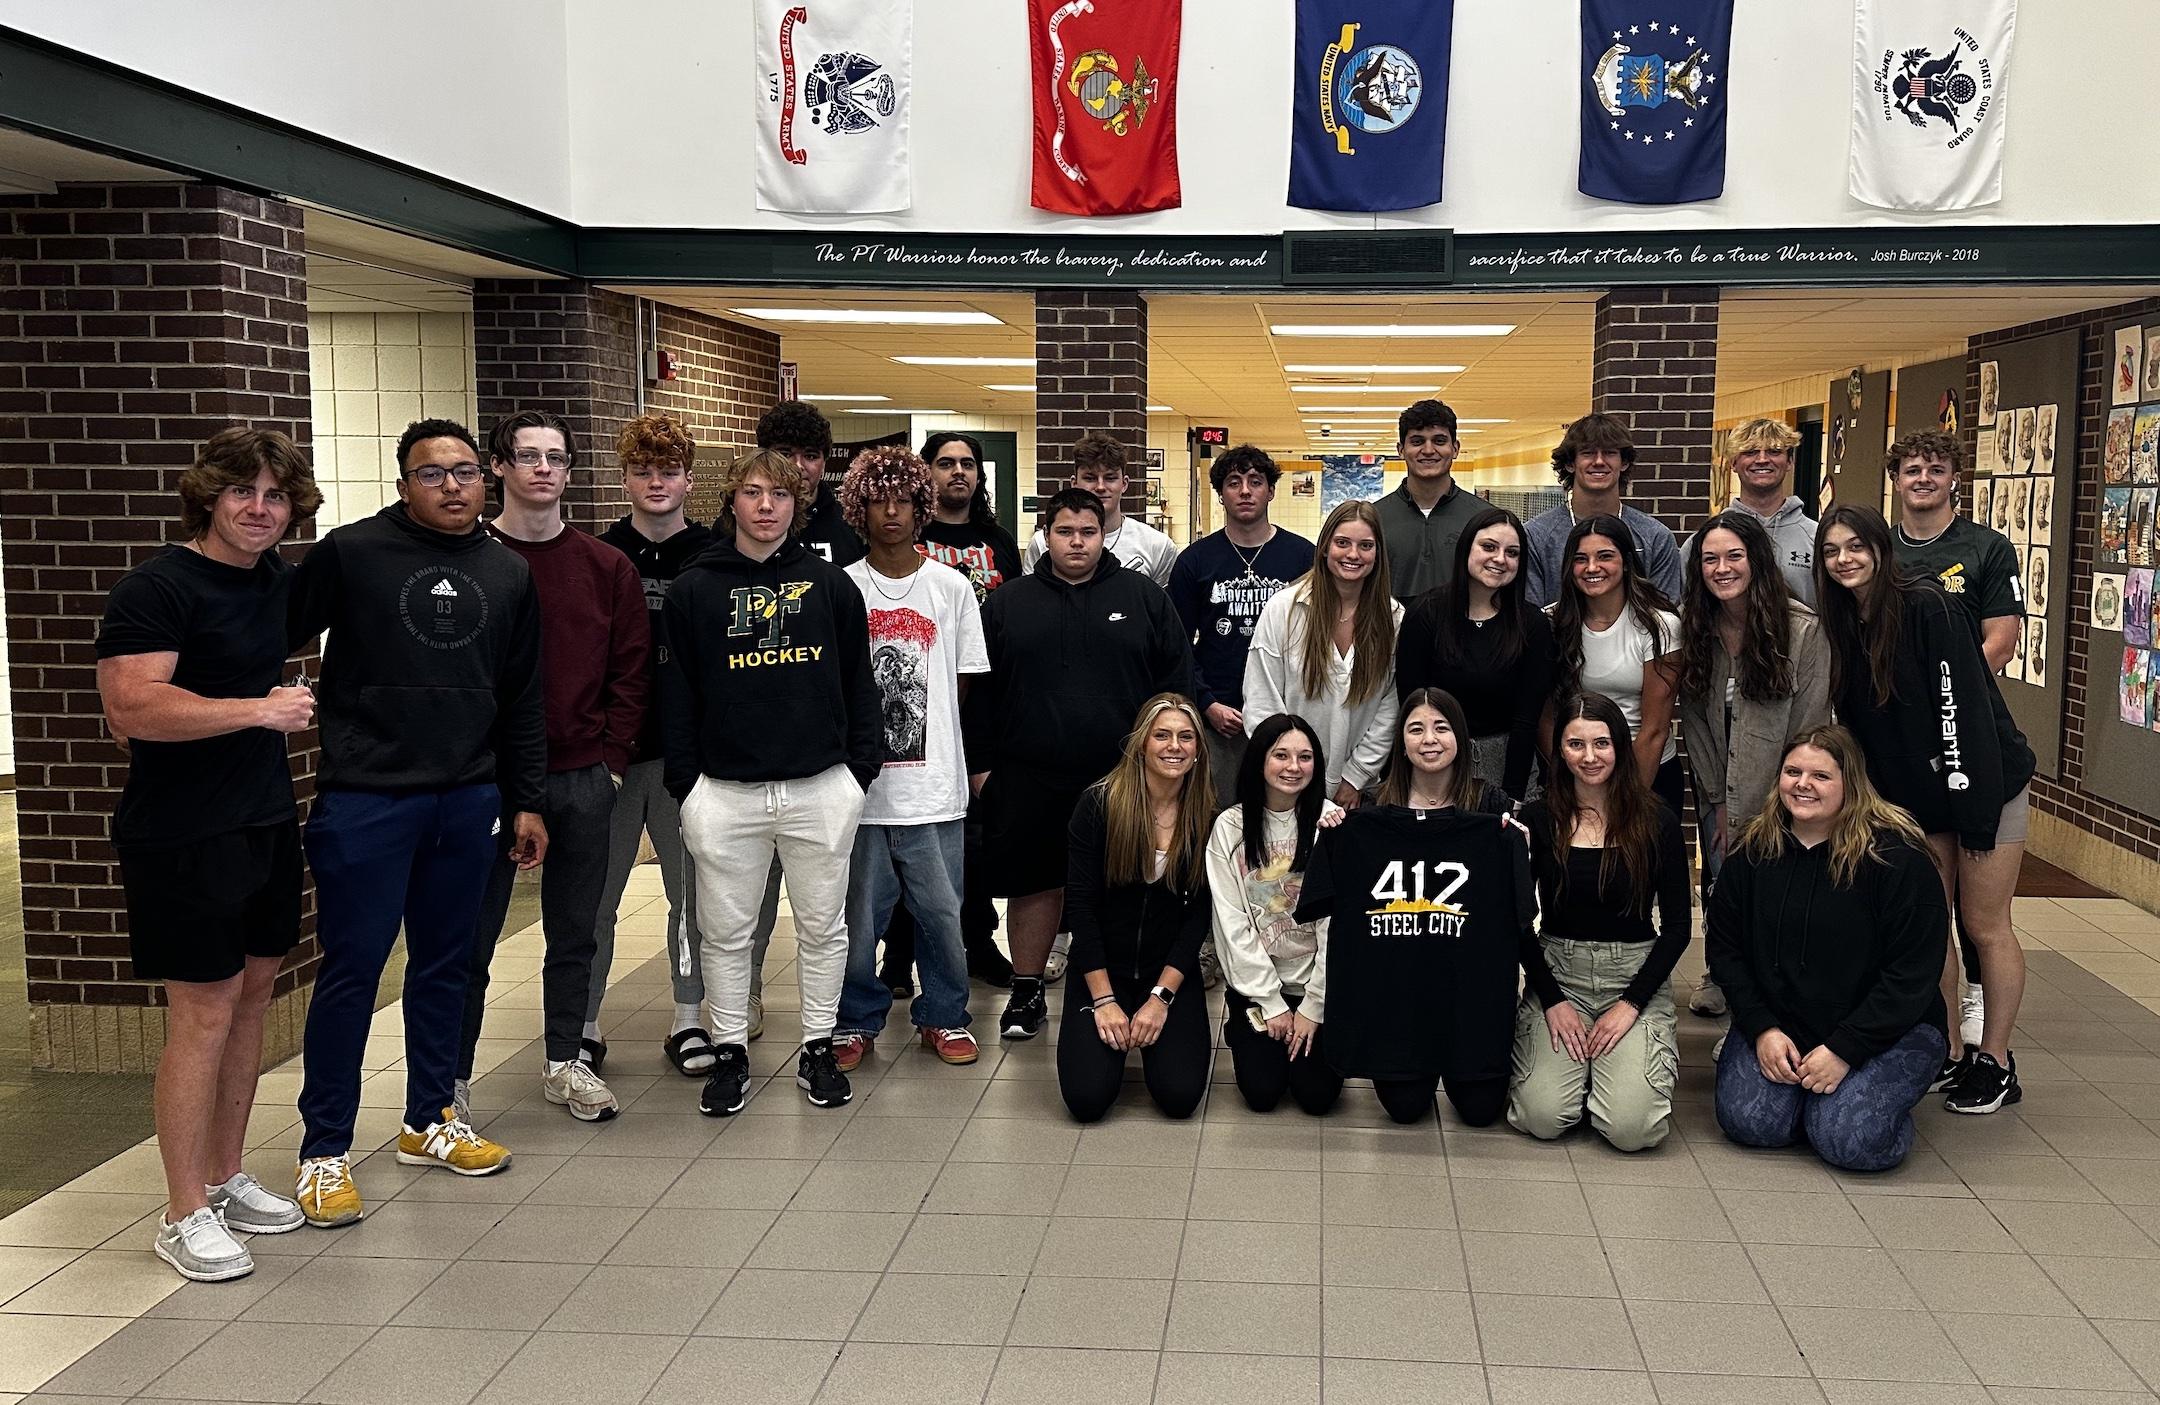 The 5th-period class designed and sold a ‘412’ shirt